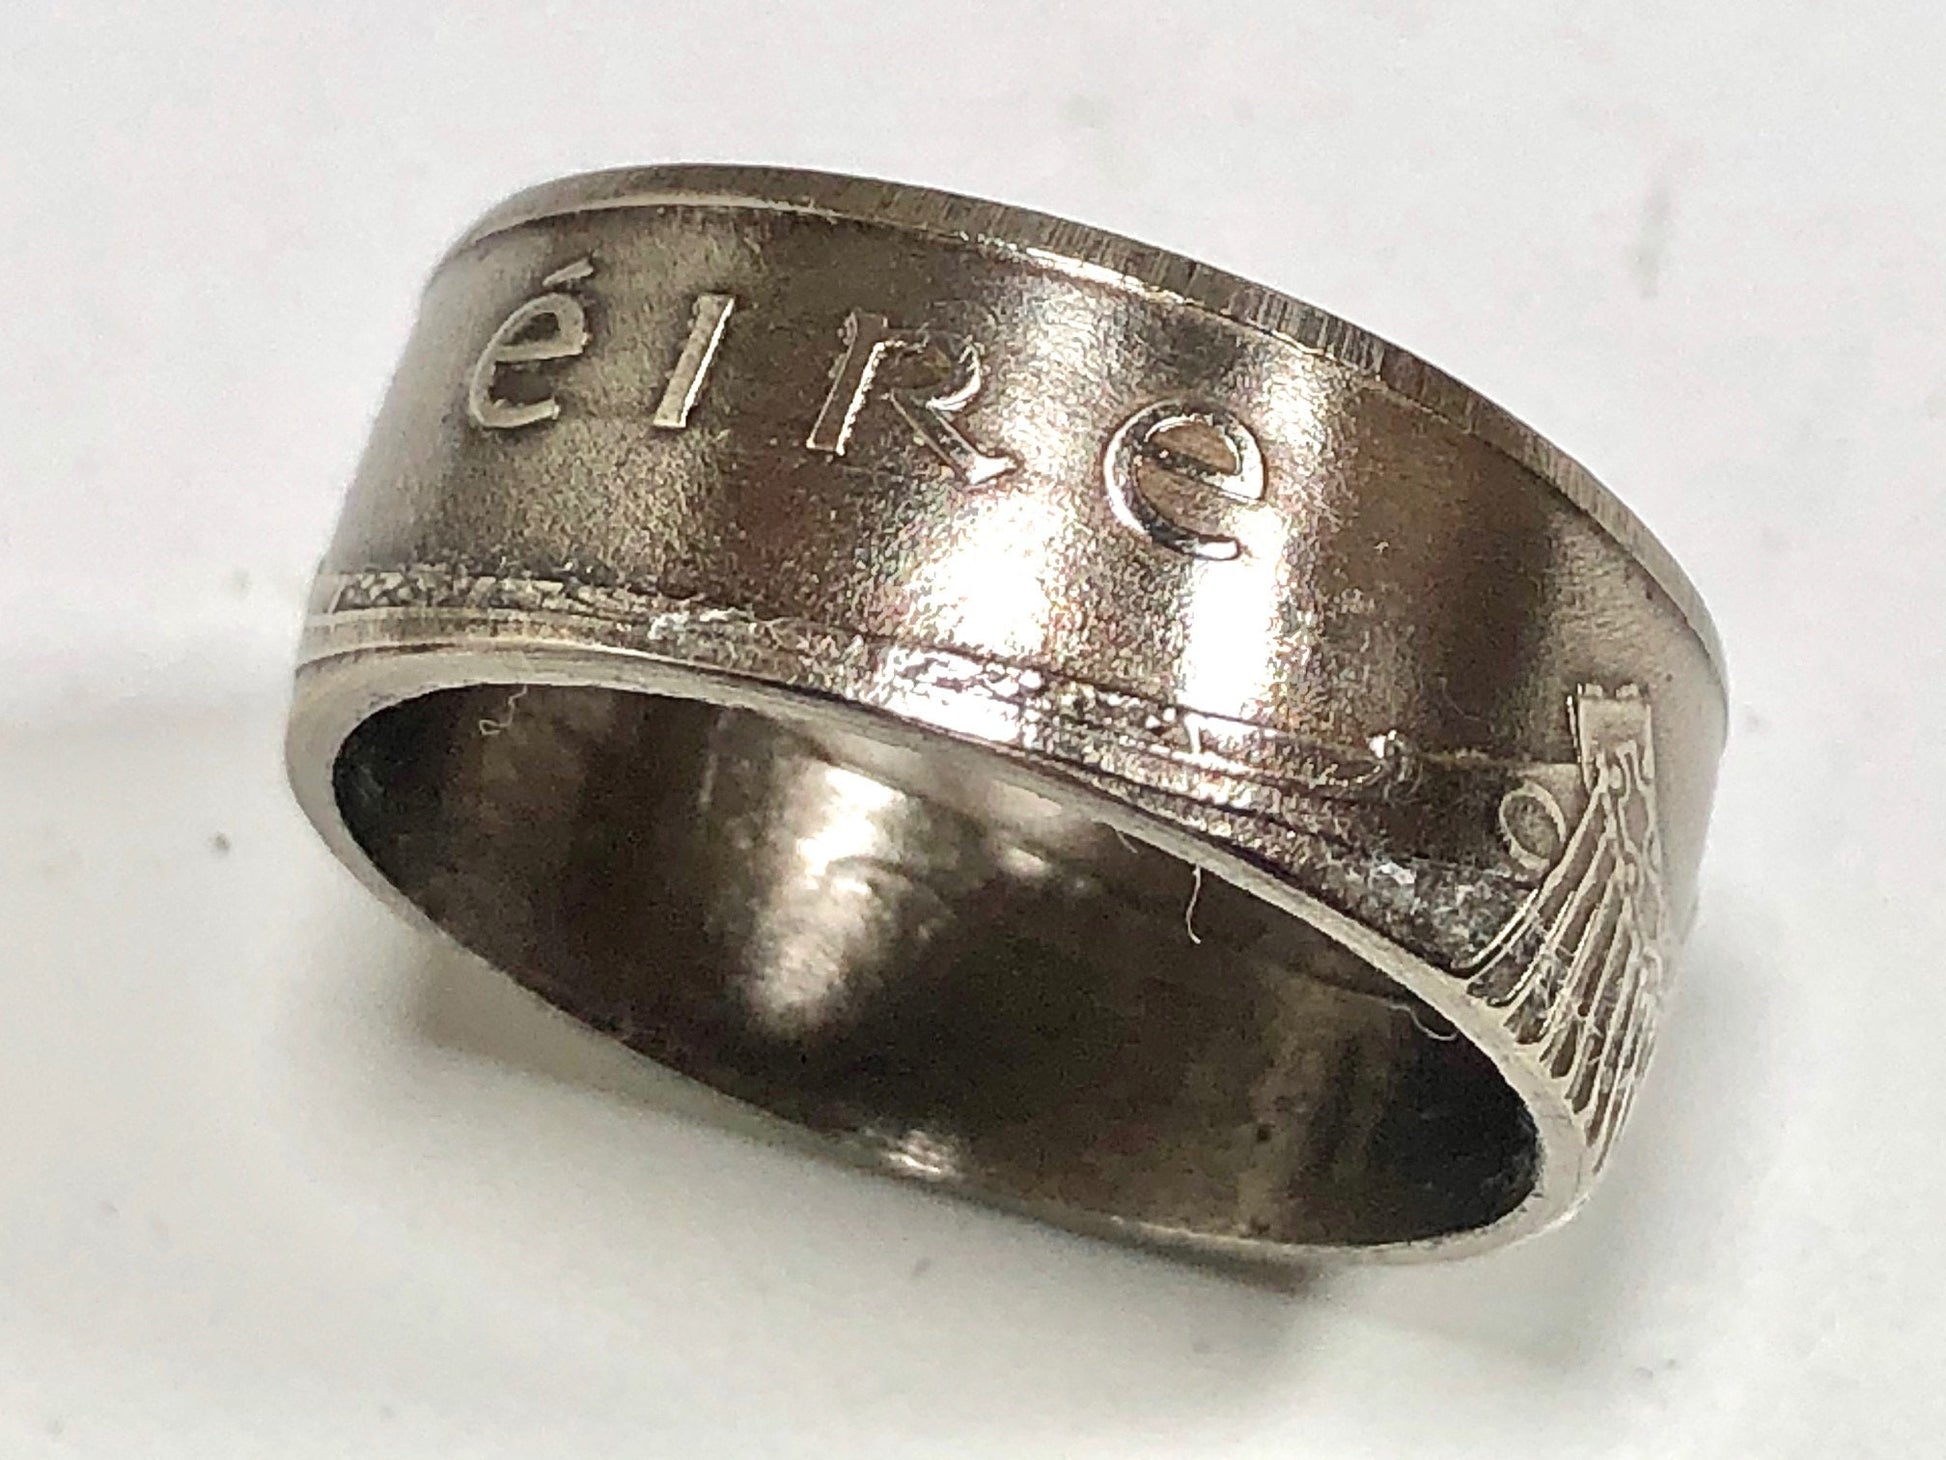 Ireland Coin Ring 10 Pence Irish Celtic Harp Lucky Shamrock Jewelry Gift Charm For Friend Coin Ring Gift For Him Her World Coins Collector